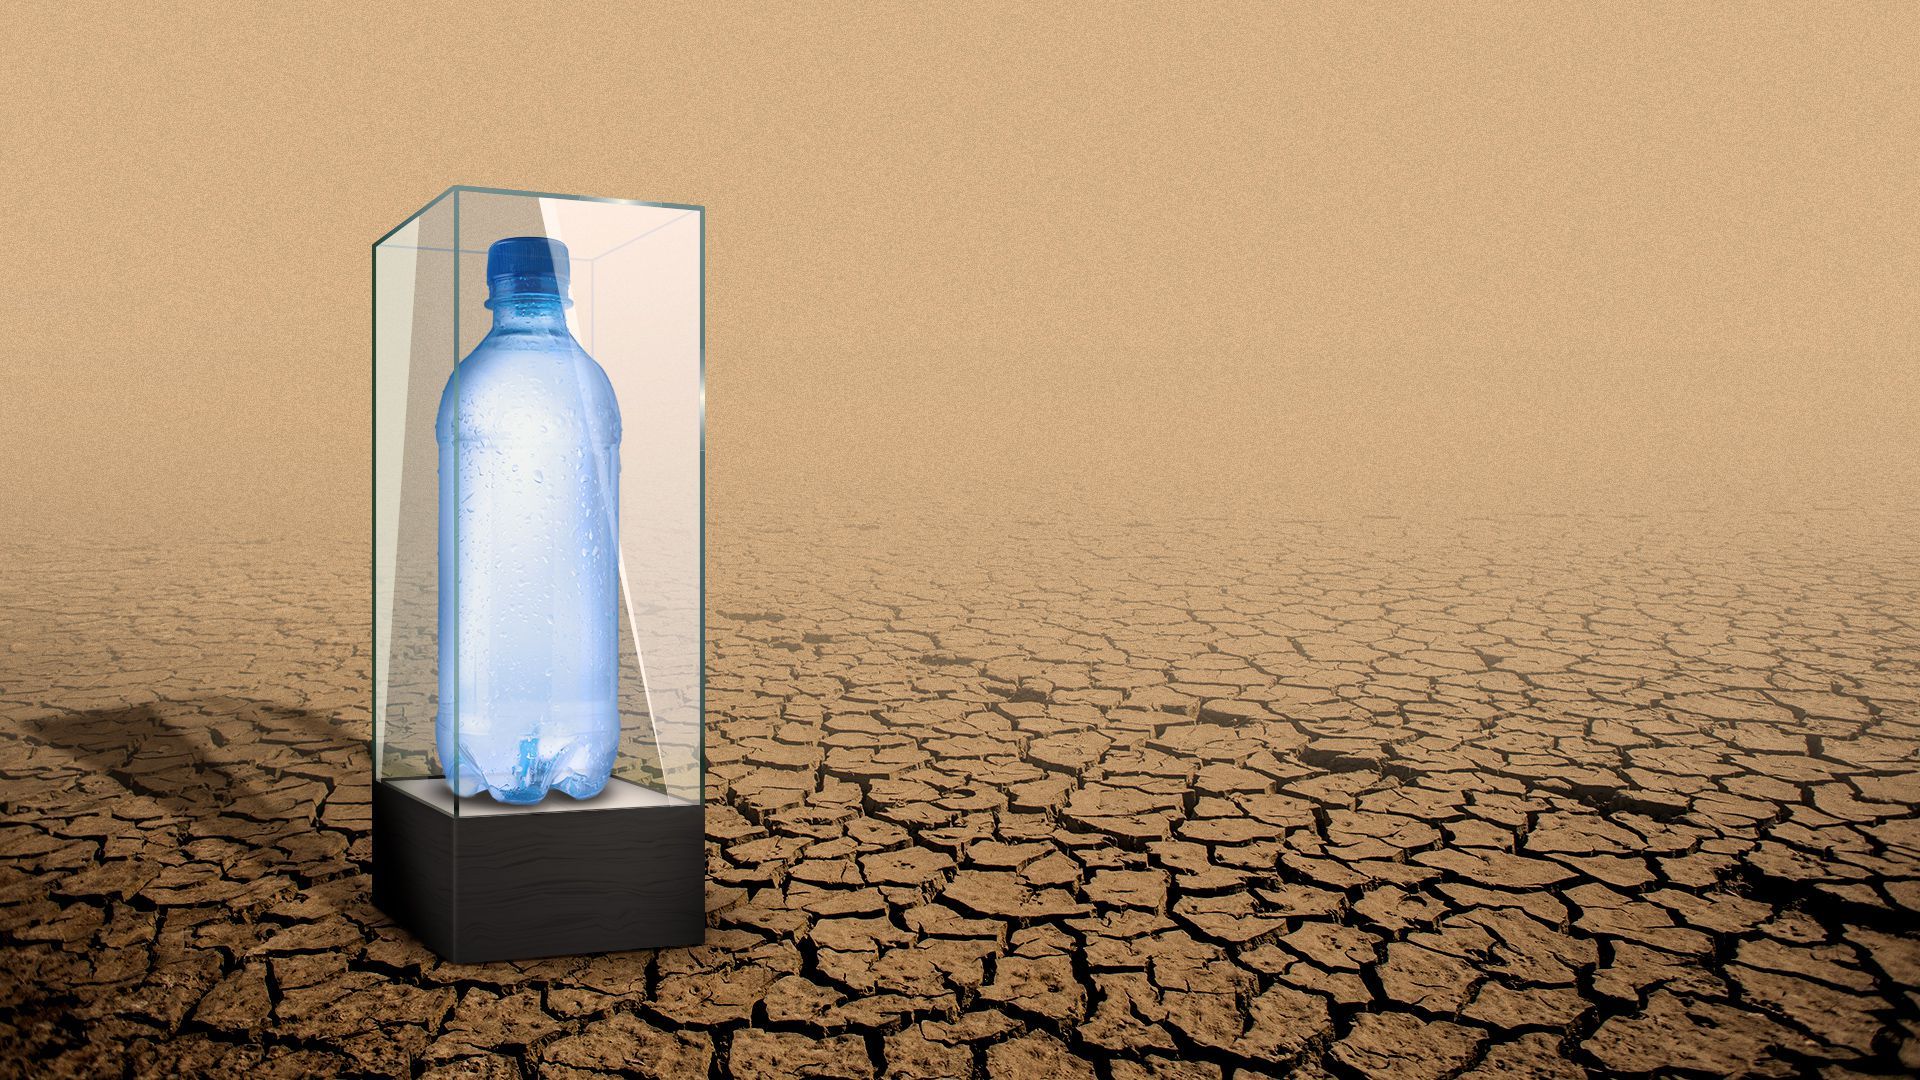 Illustration of an ice cold bottle of water in a glass case in a dried out landscape. 